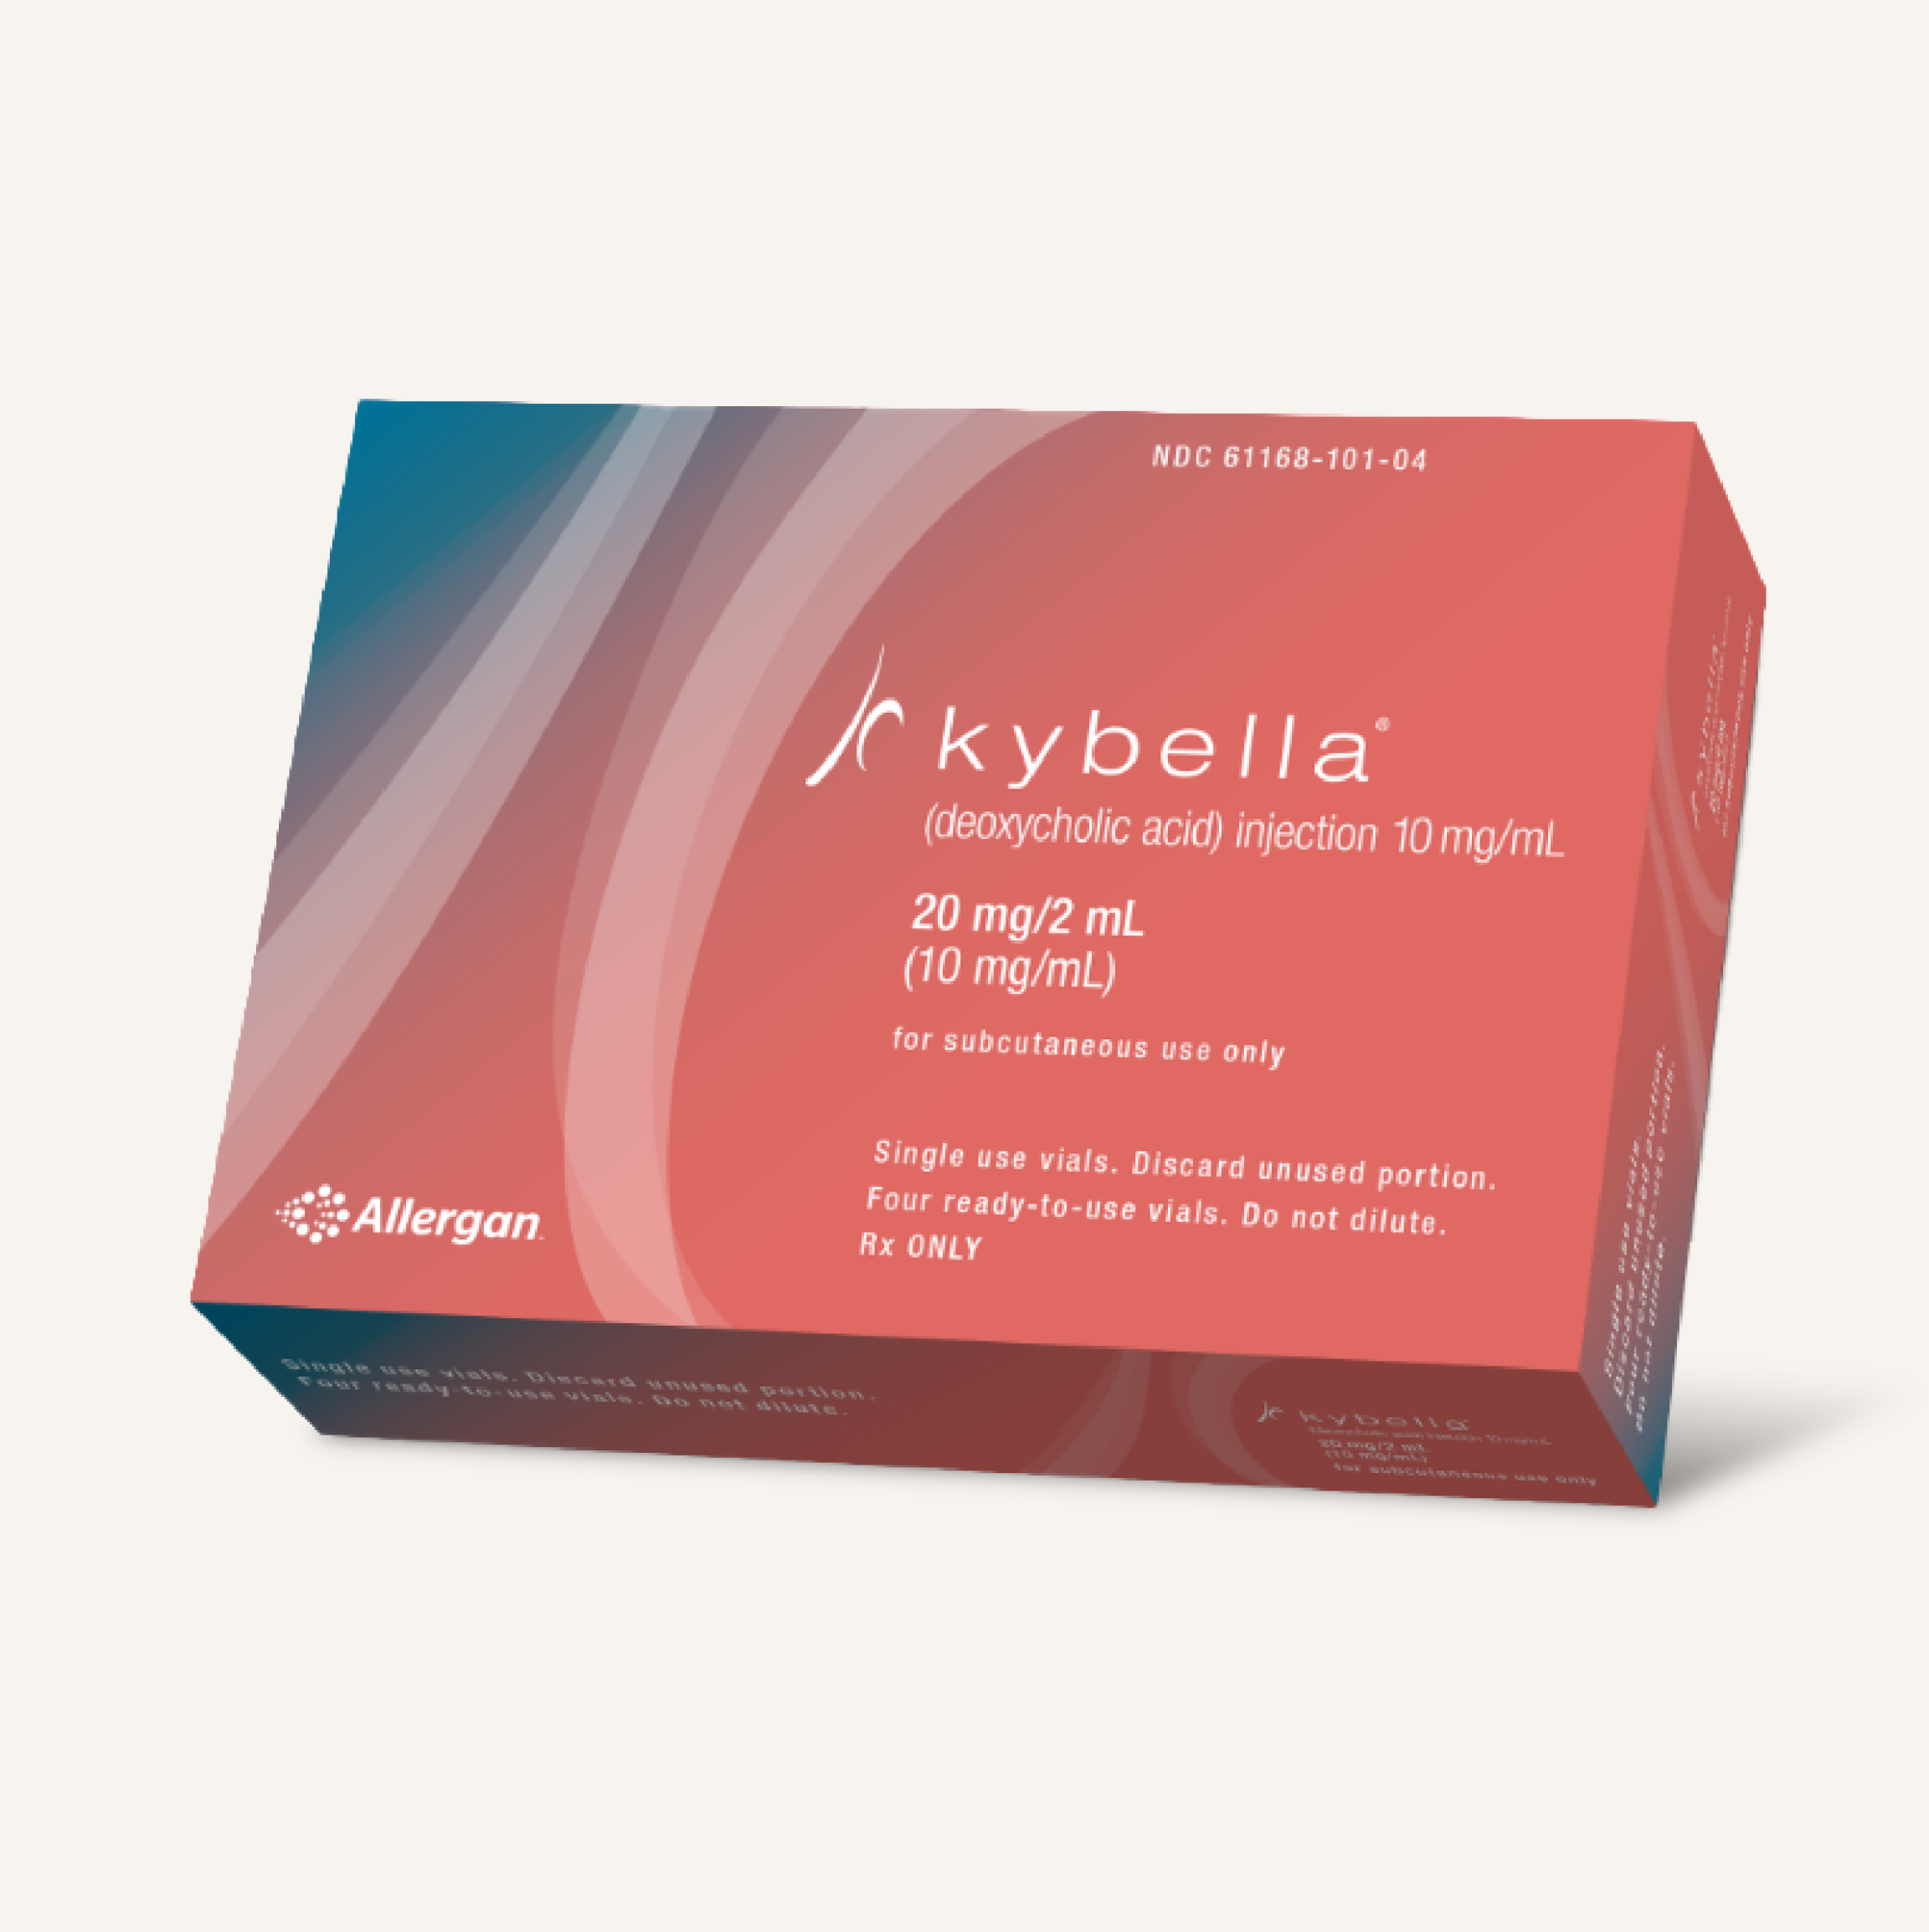 Kybella product packaging